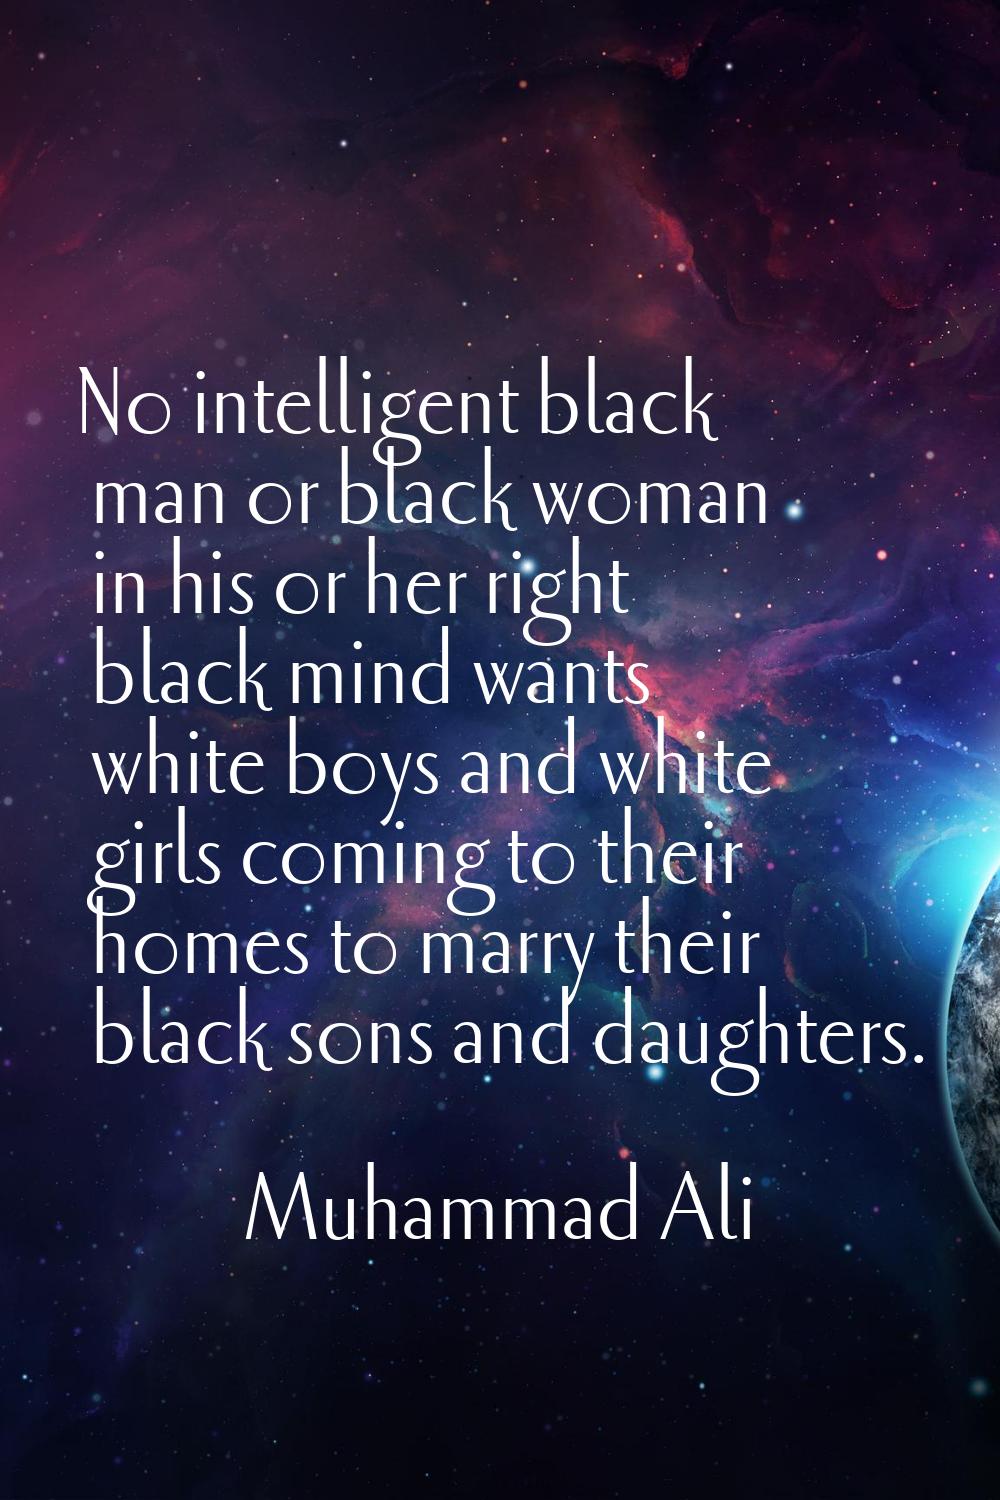 No intelligent black man or black woman in his or her right black mind wants white boys and white g